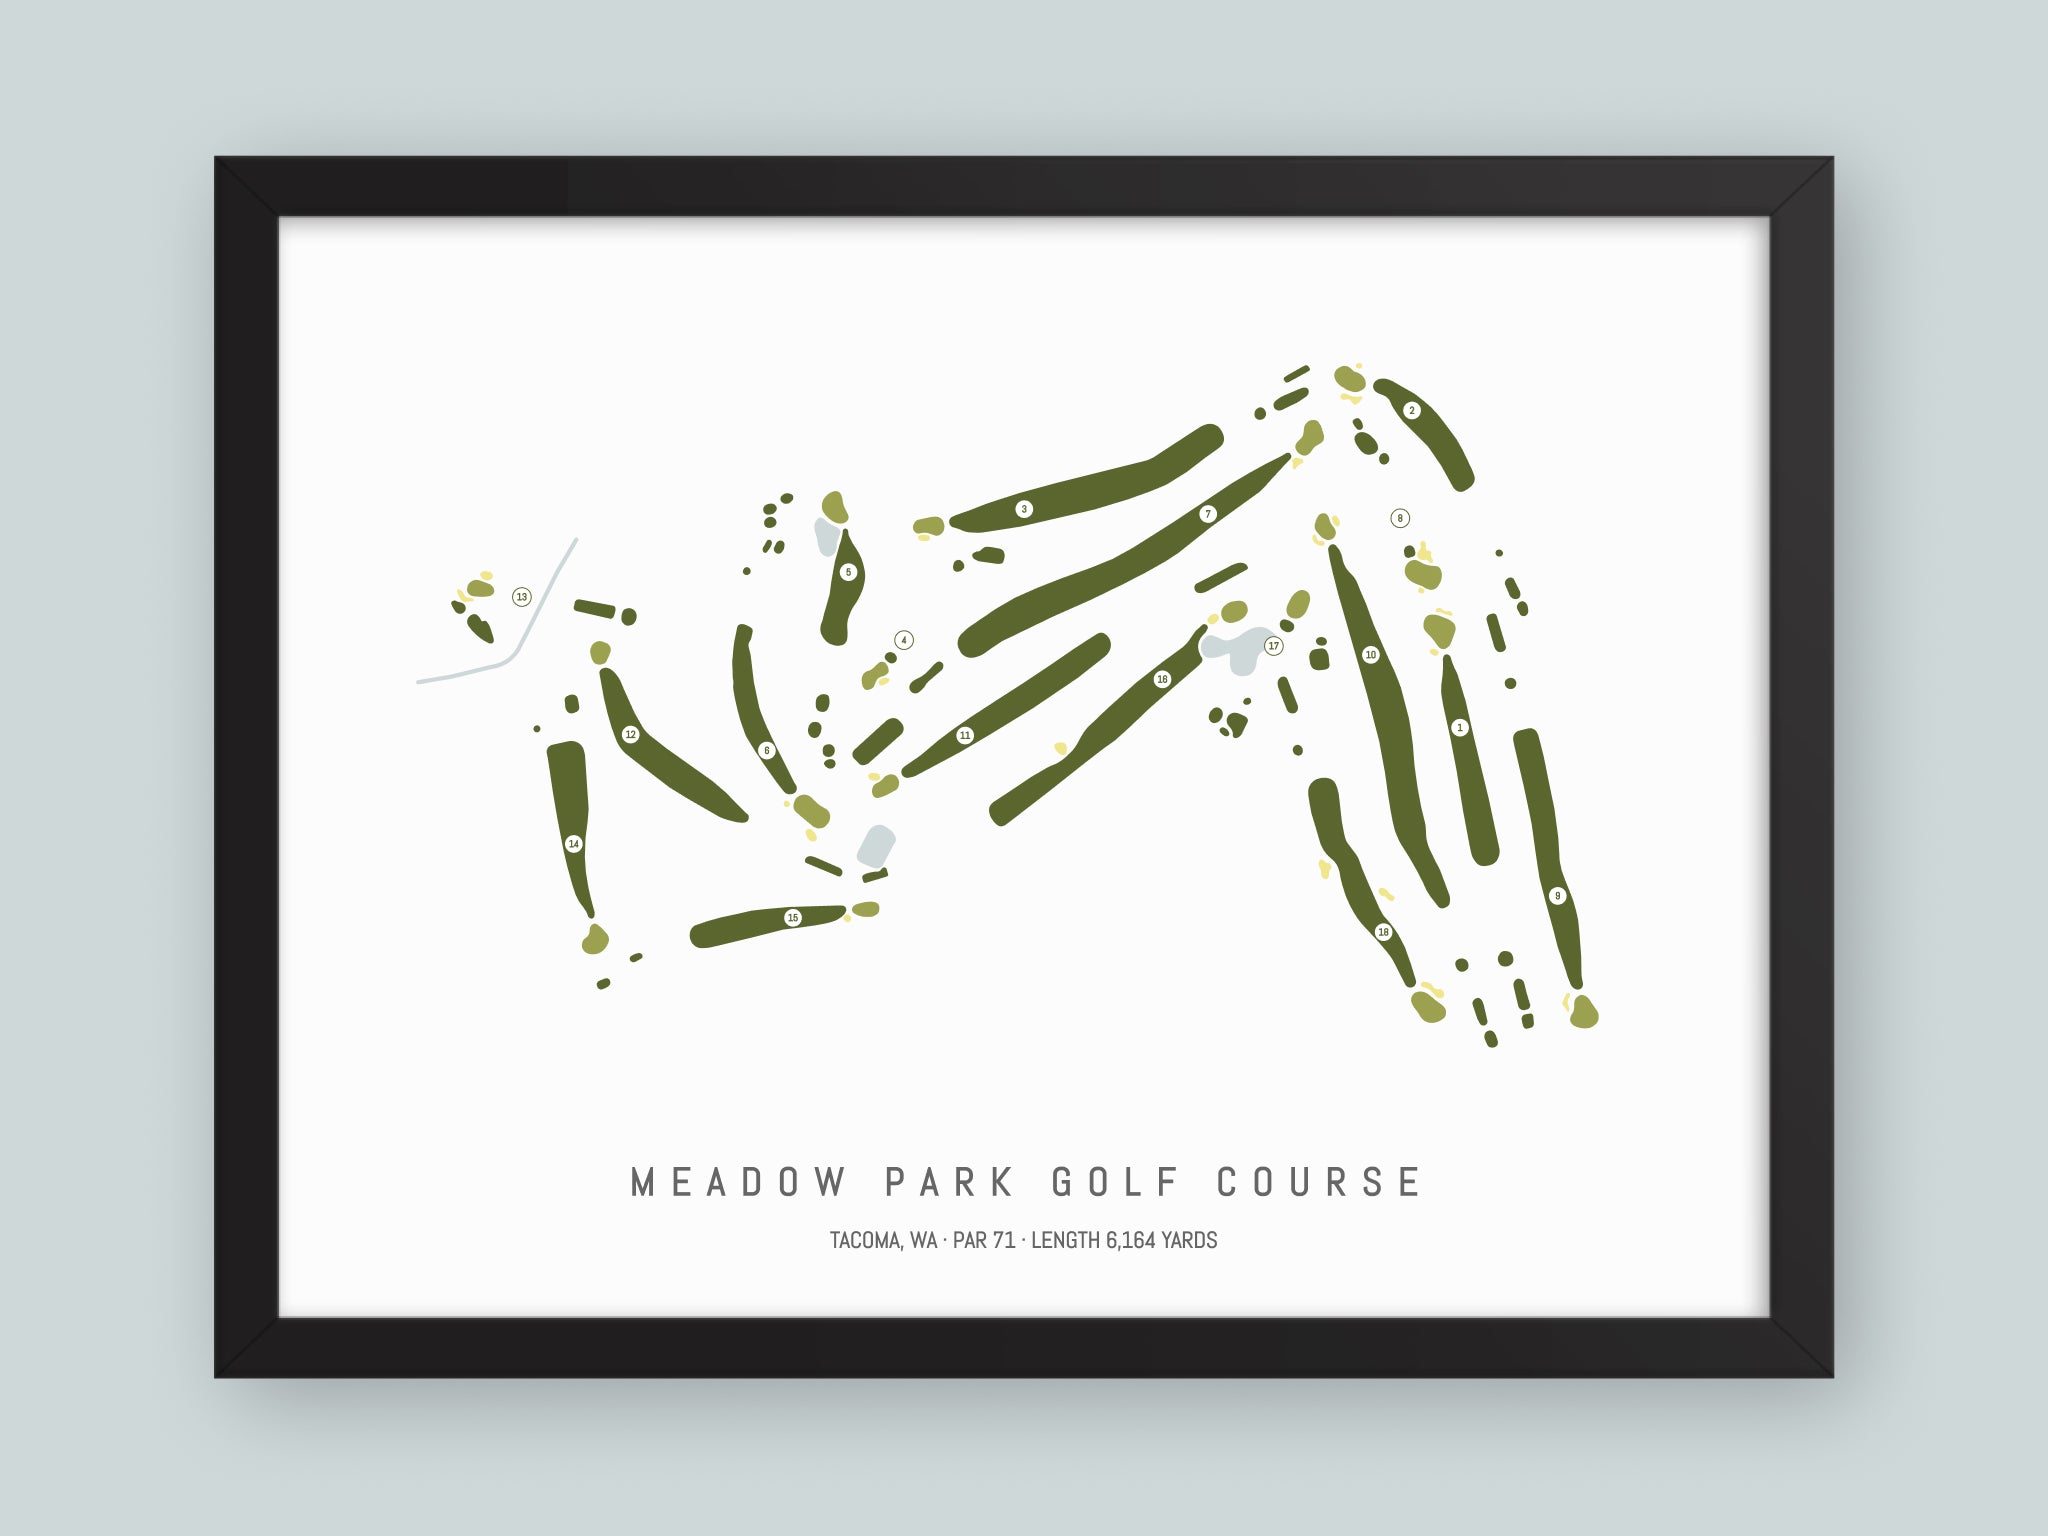 Meadow-Park-Golf-Course-WA--Black-Frame-24x18-With-Hole-Numbers